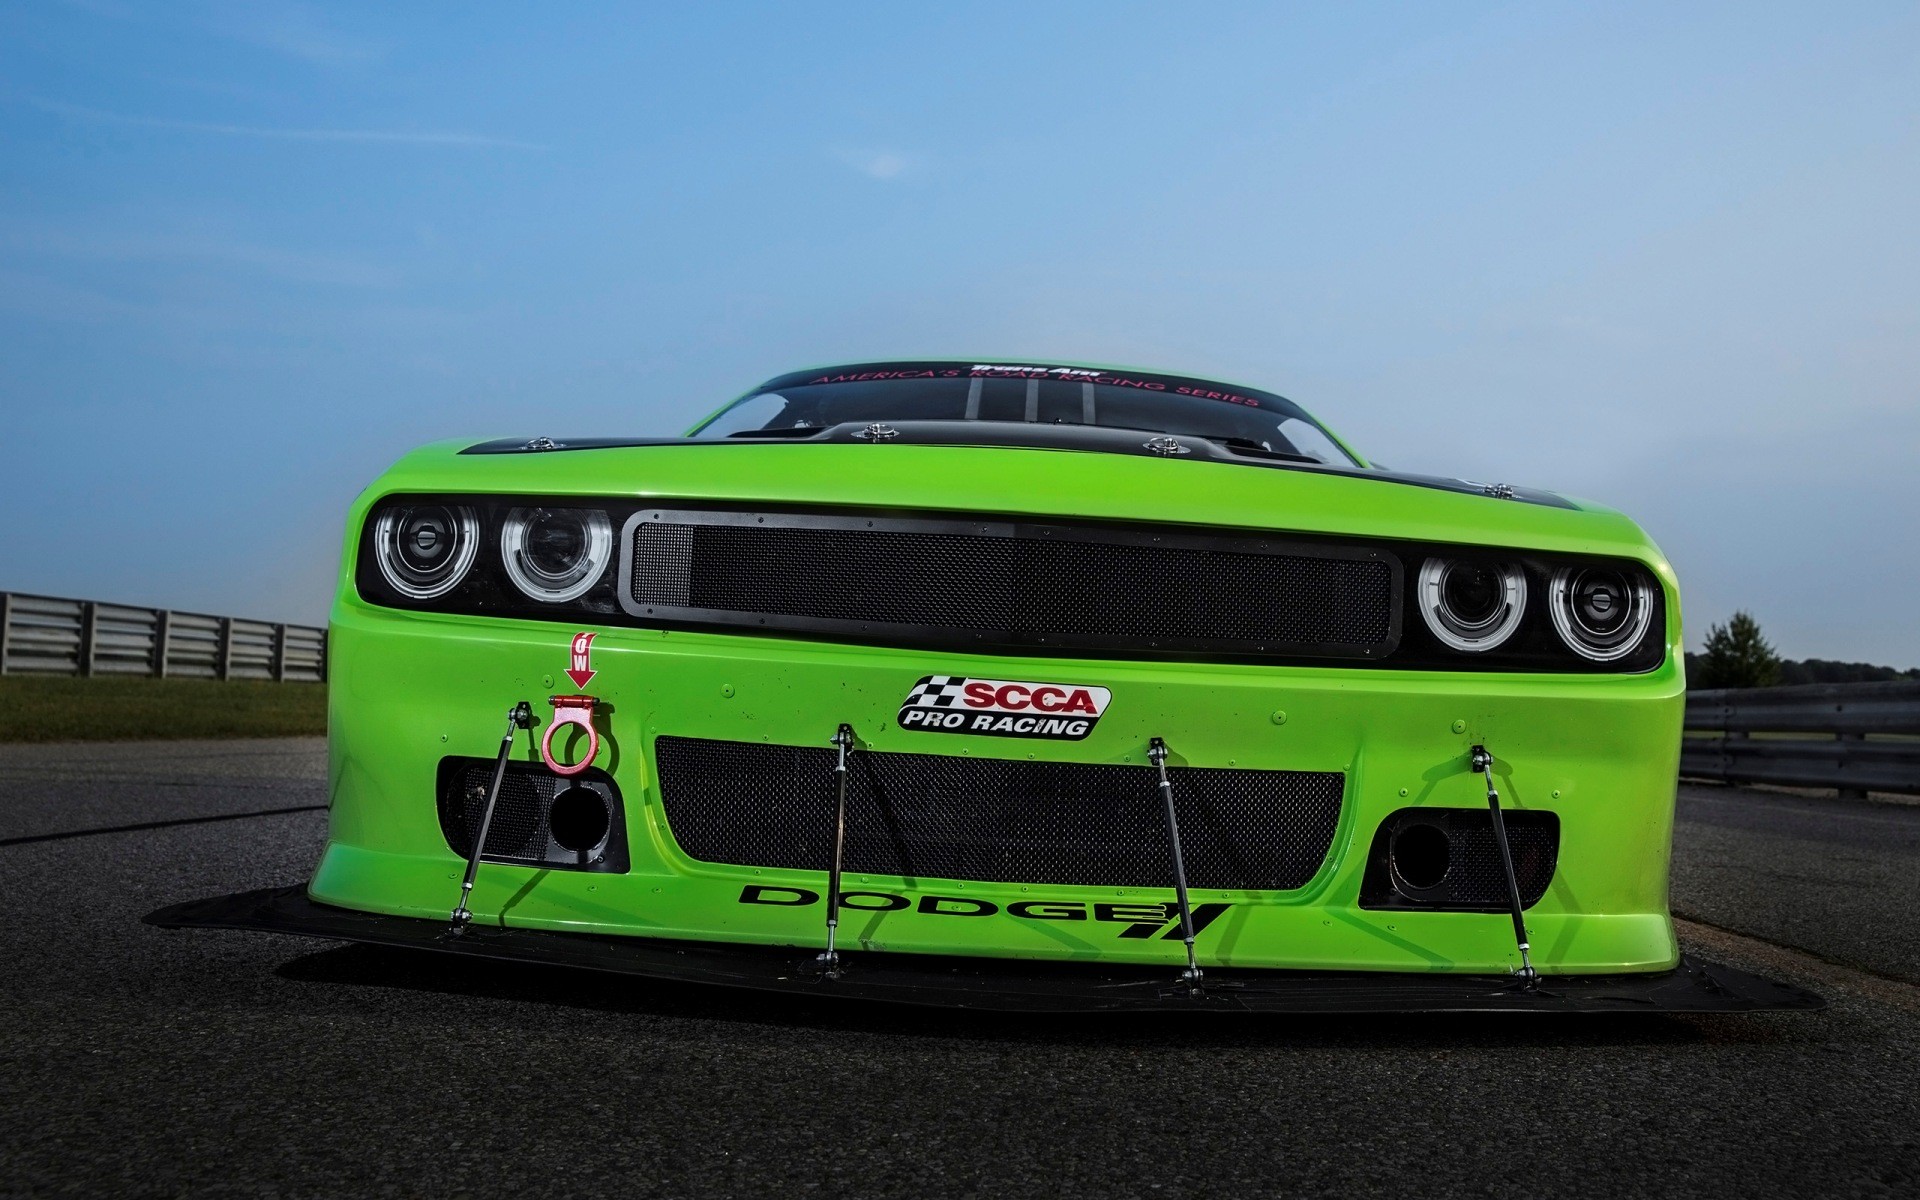 General 1920x1200 Dodge Challenger Dodge green cars frontal view car vehicle muscle cars American cars Stellantis